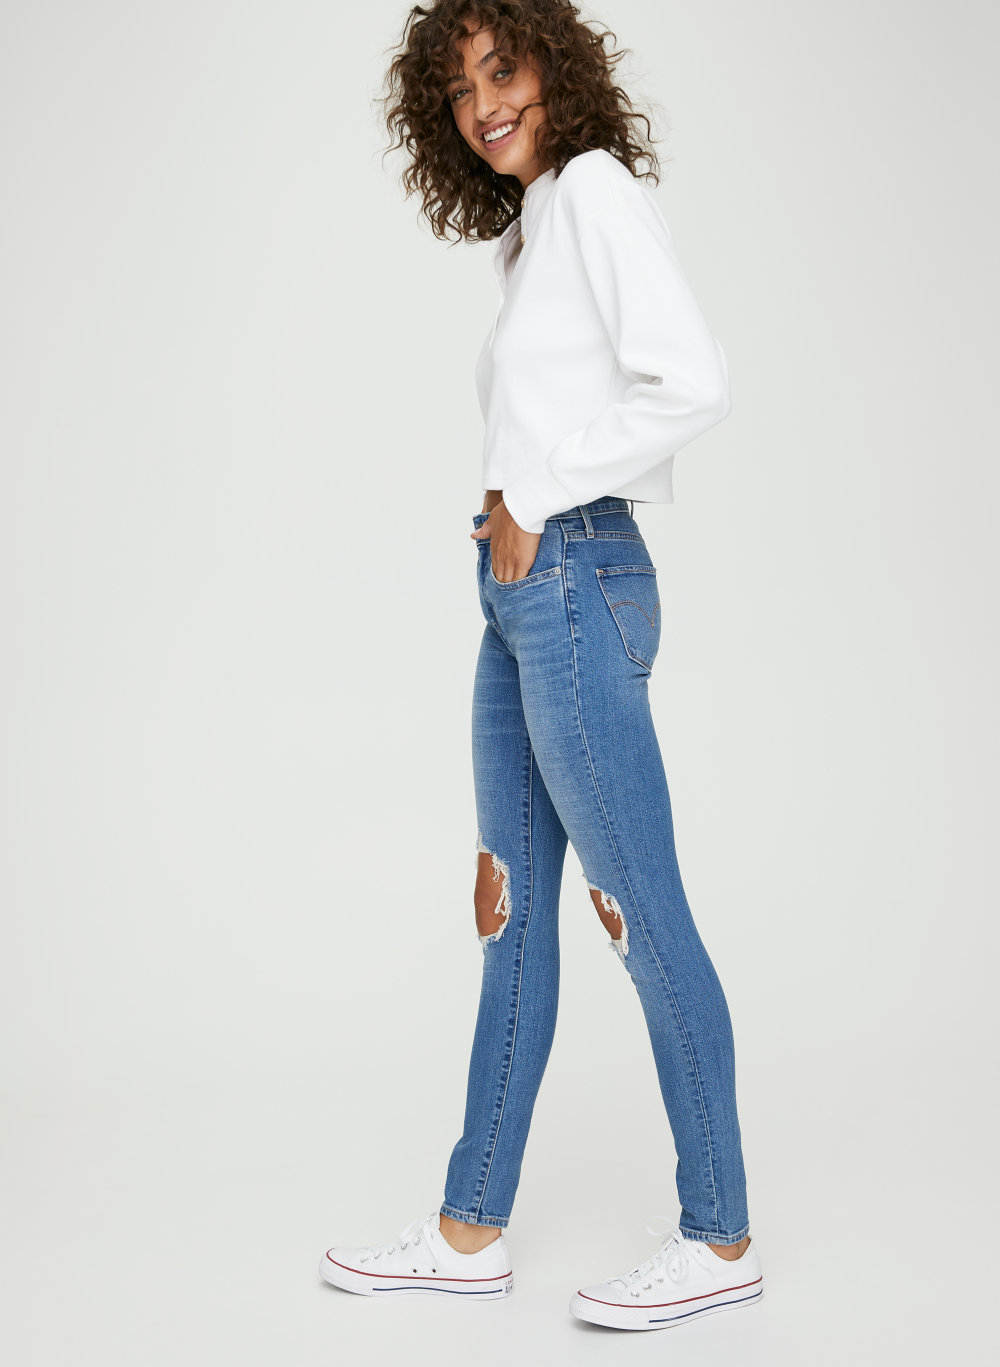 levi's 721 ripped skinny jeans